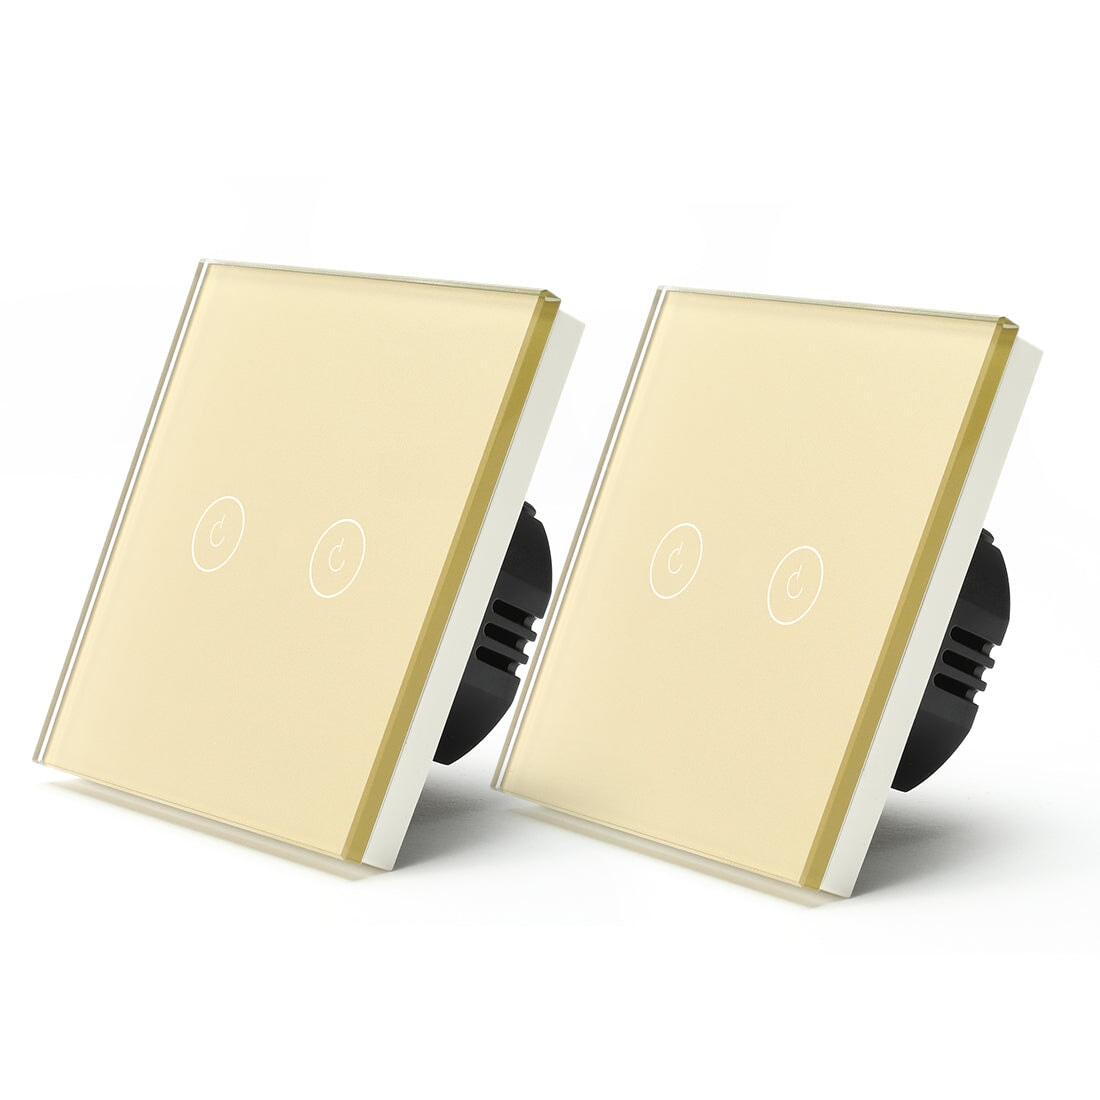 Bseed Smart Wifi Touch Switch 2 Gang 1/2/3 Way 1/2/3 Pcs/Pack Wall Plates & Covers Bseedswitch Golden 2Pcs/Pack 